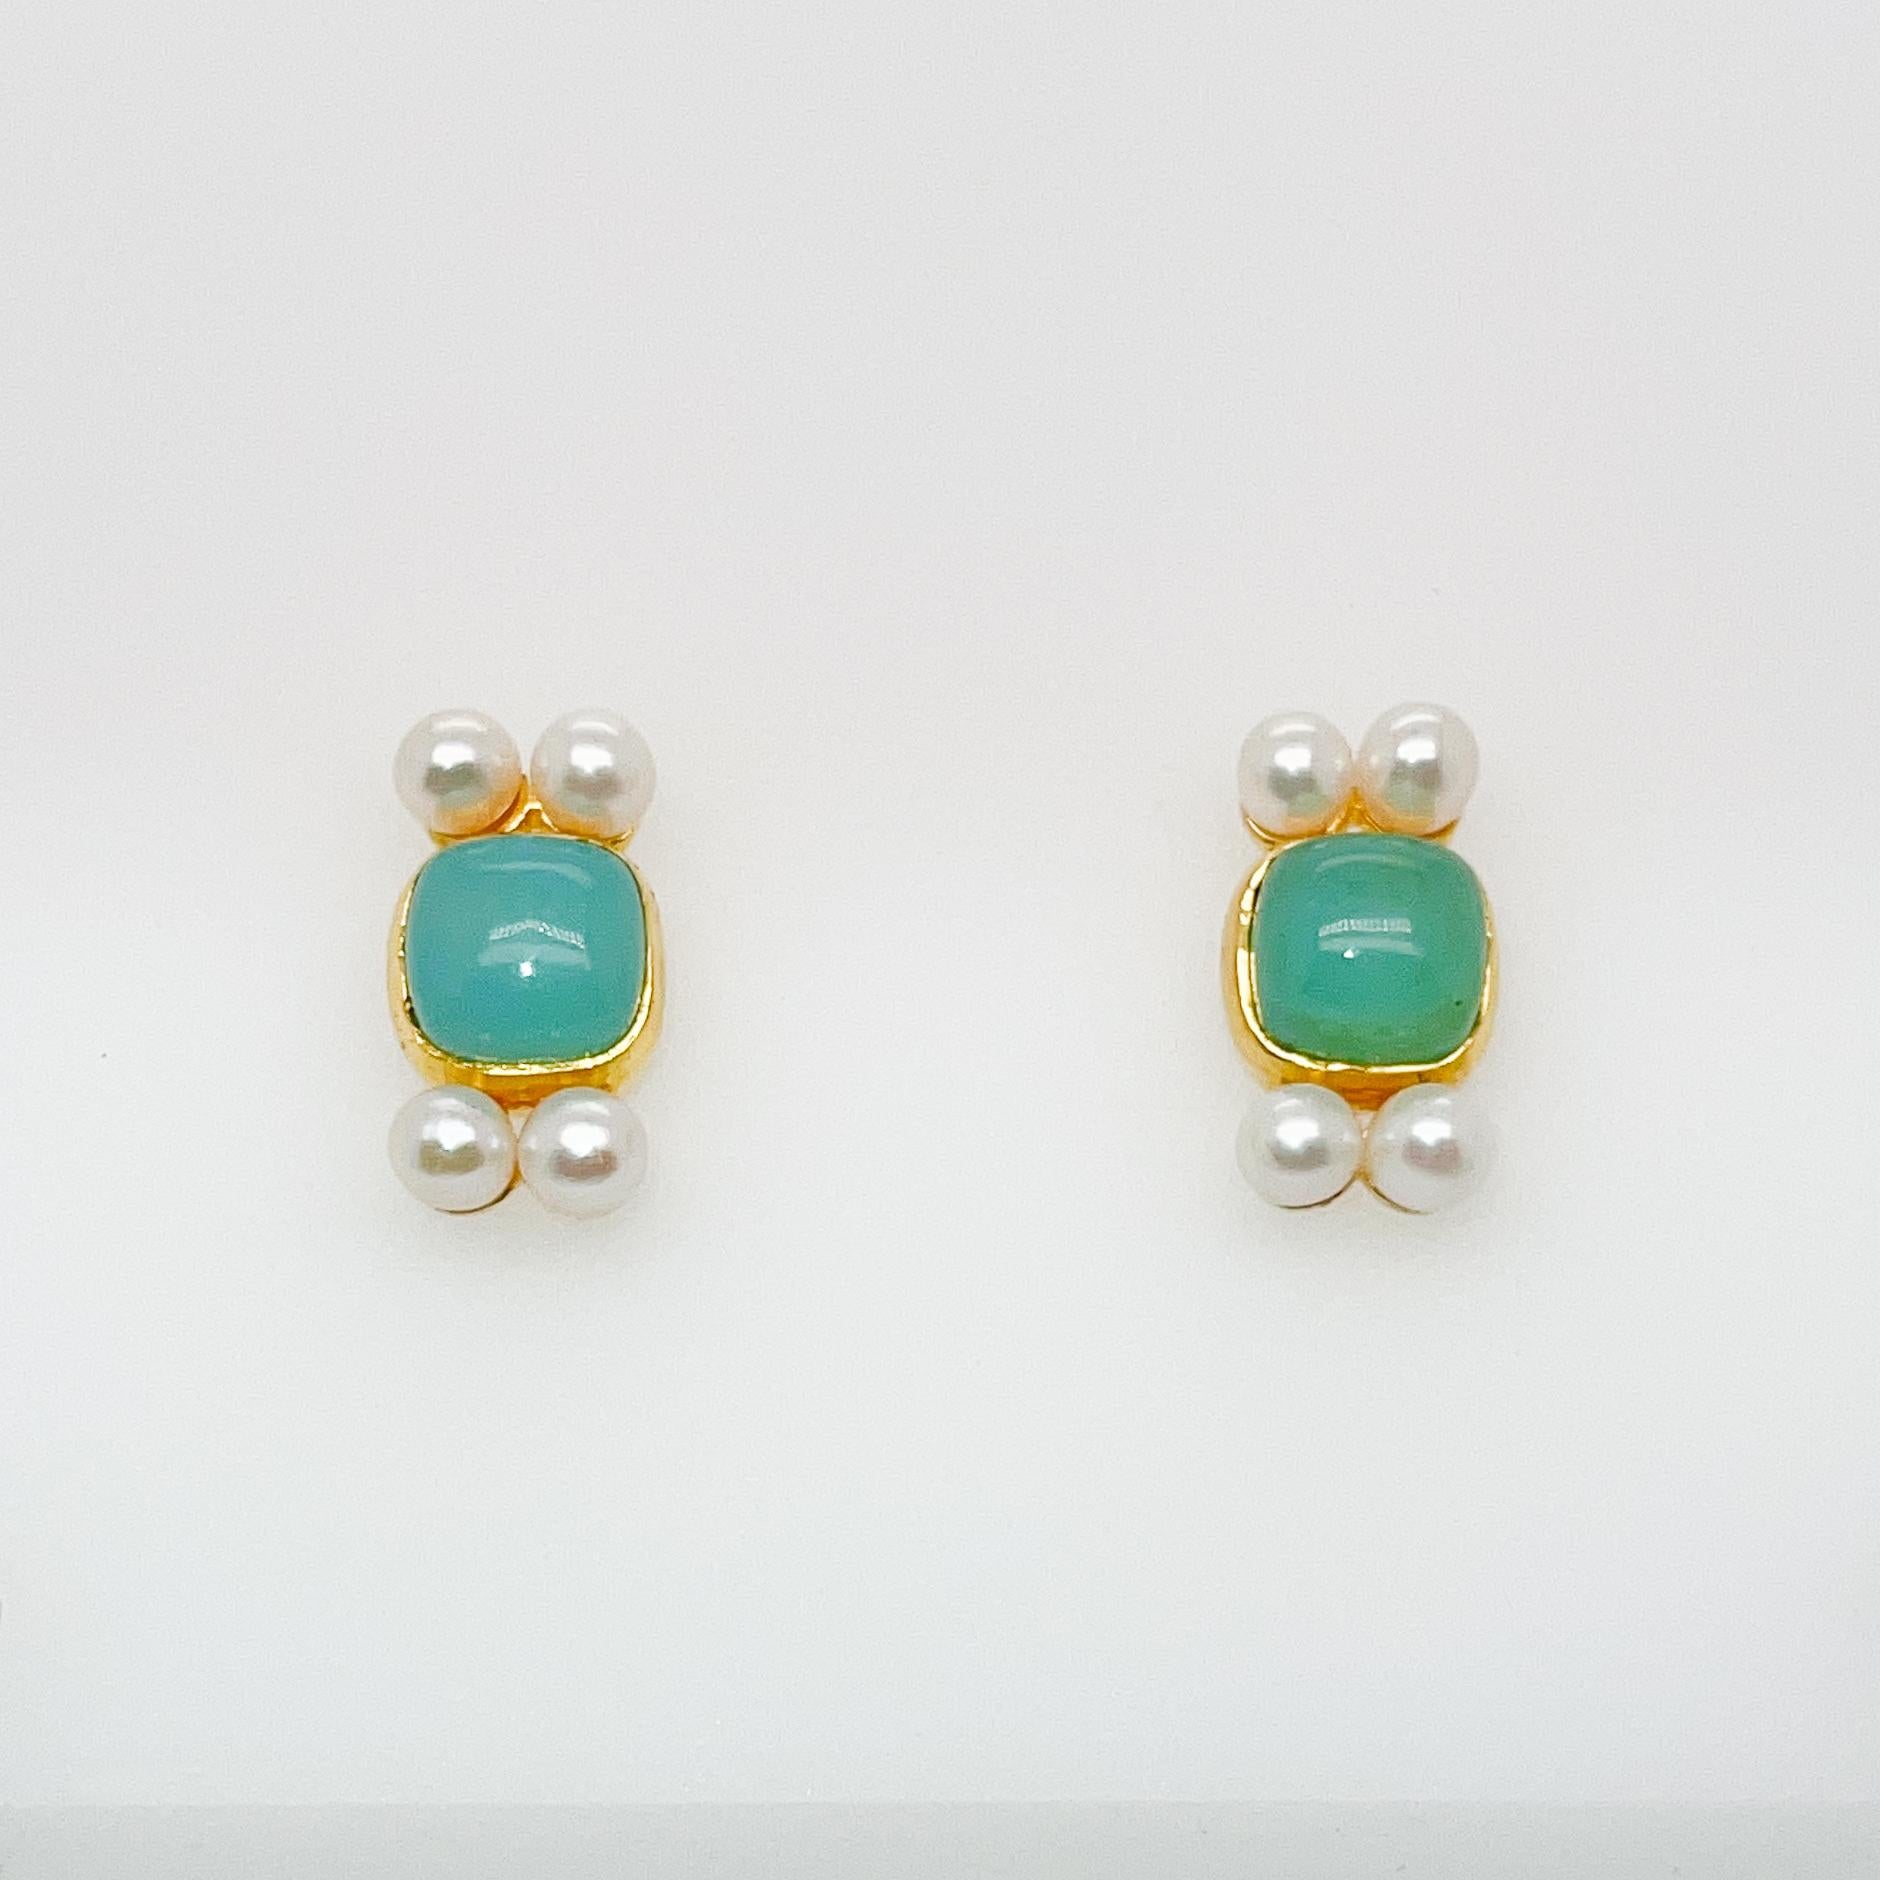 A very fine pair of 14k gold post earrings.

With a square smooth chrysoprase cabochons center set and framed by four small, round white pearls at top and bottom.

Simply a lovely pair of gold post earrings!

Date:
20th Century

Overall